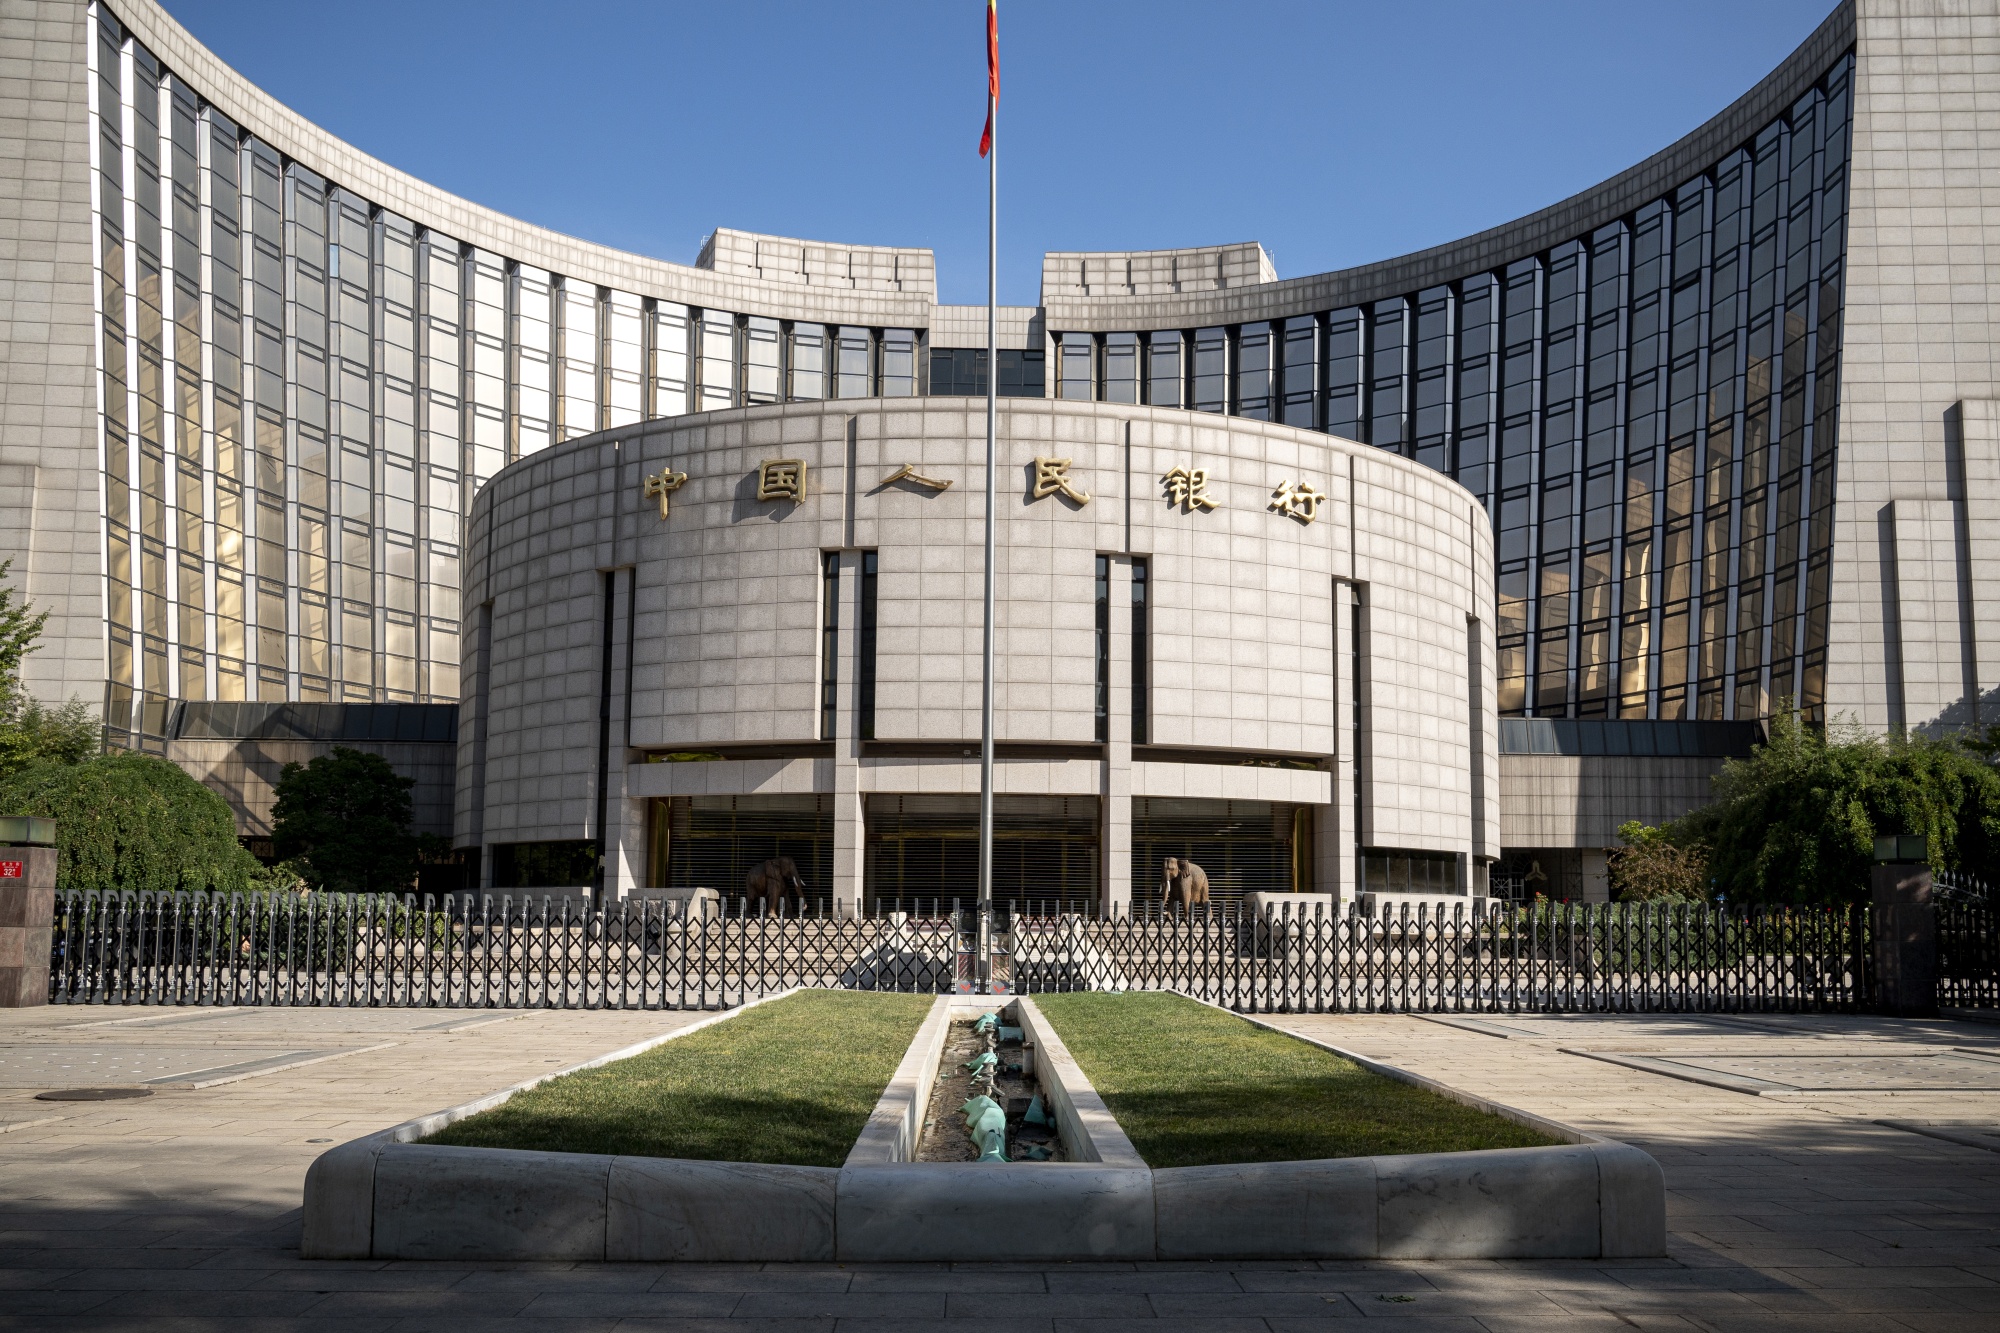 The People's Bank of China (PBOC) building in Beijing.